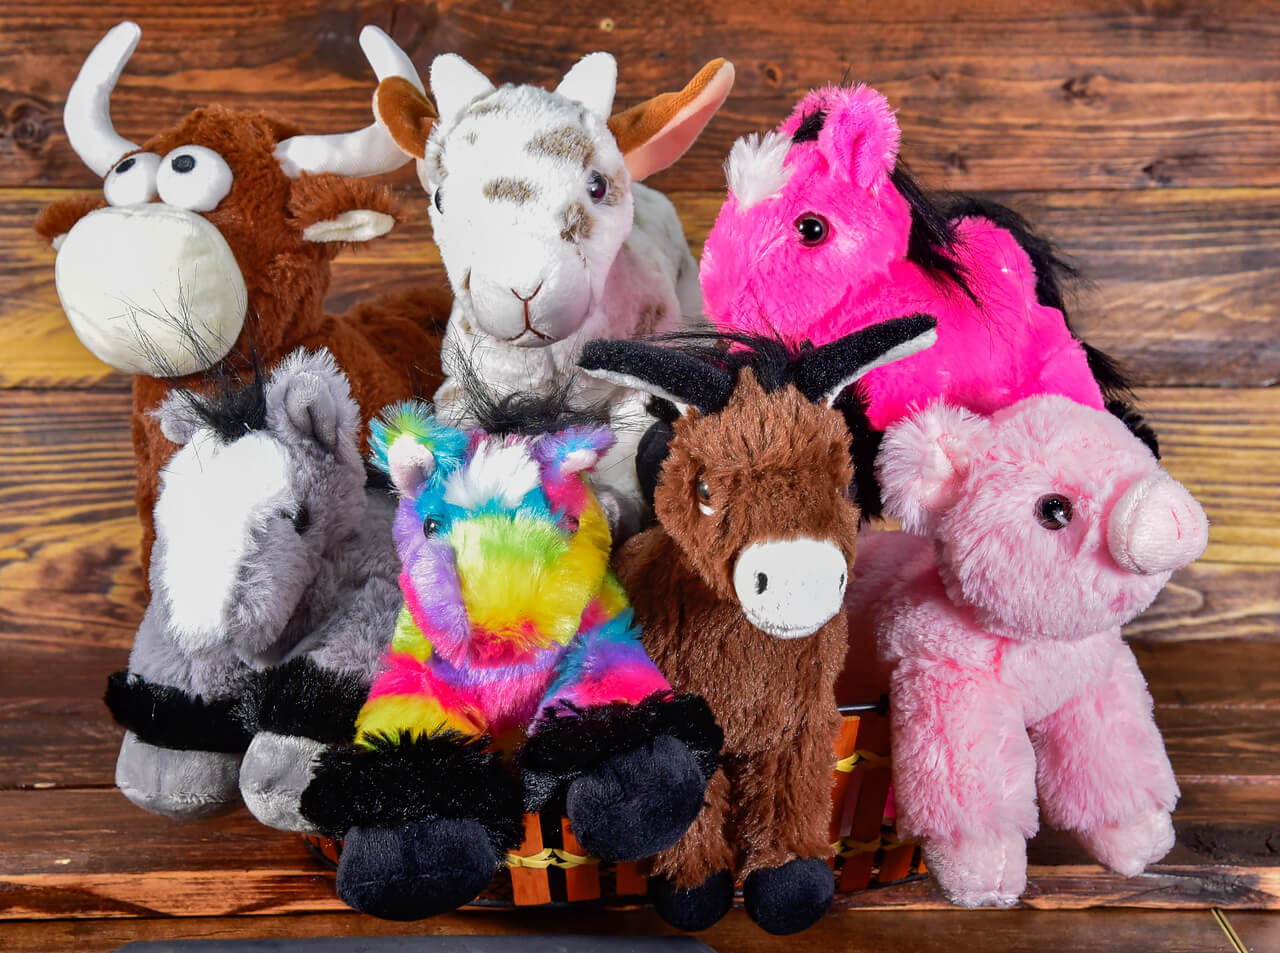 Stuffed Western Animals and Play Horses Cowboy and Cowgirl-Hardware